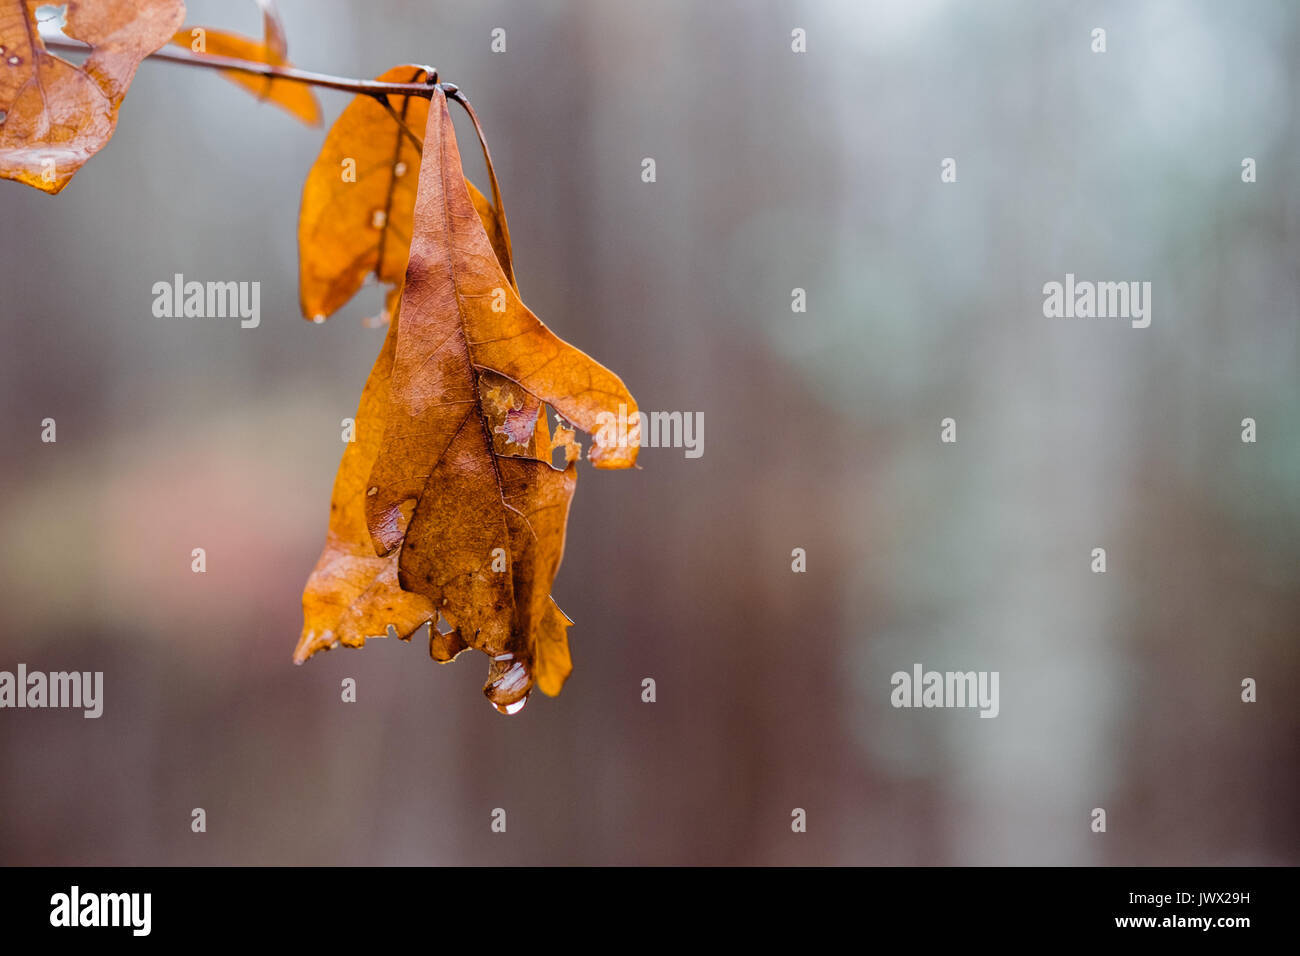 A hanging orange oak leaf with a single drop of water at the tip, after an autumn rain. The leaf is isolated in the foreground. Stock Photo